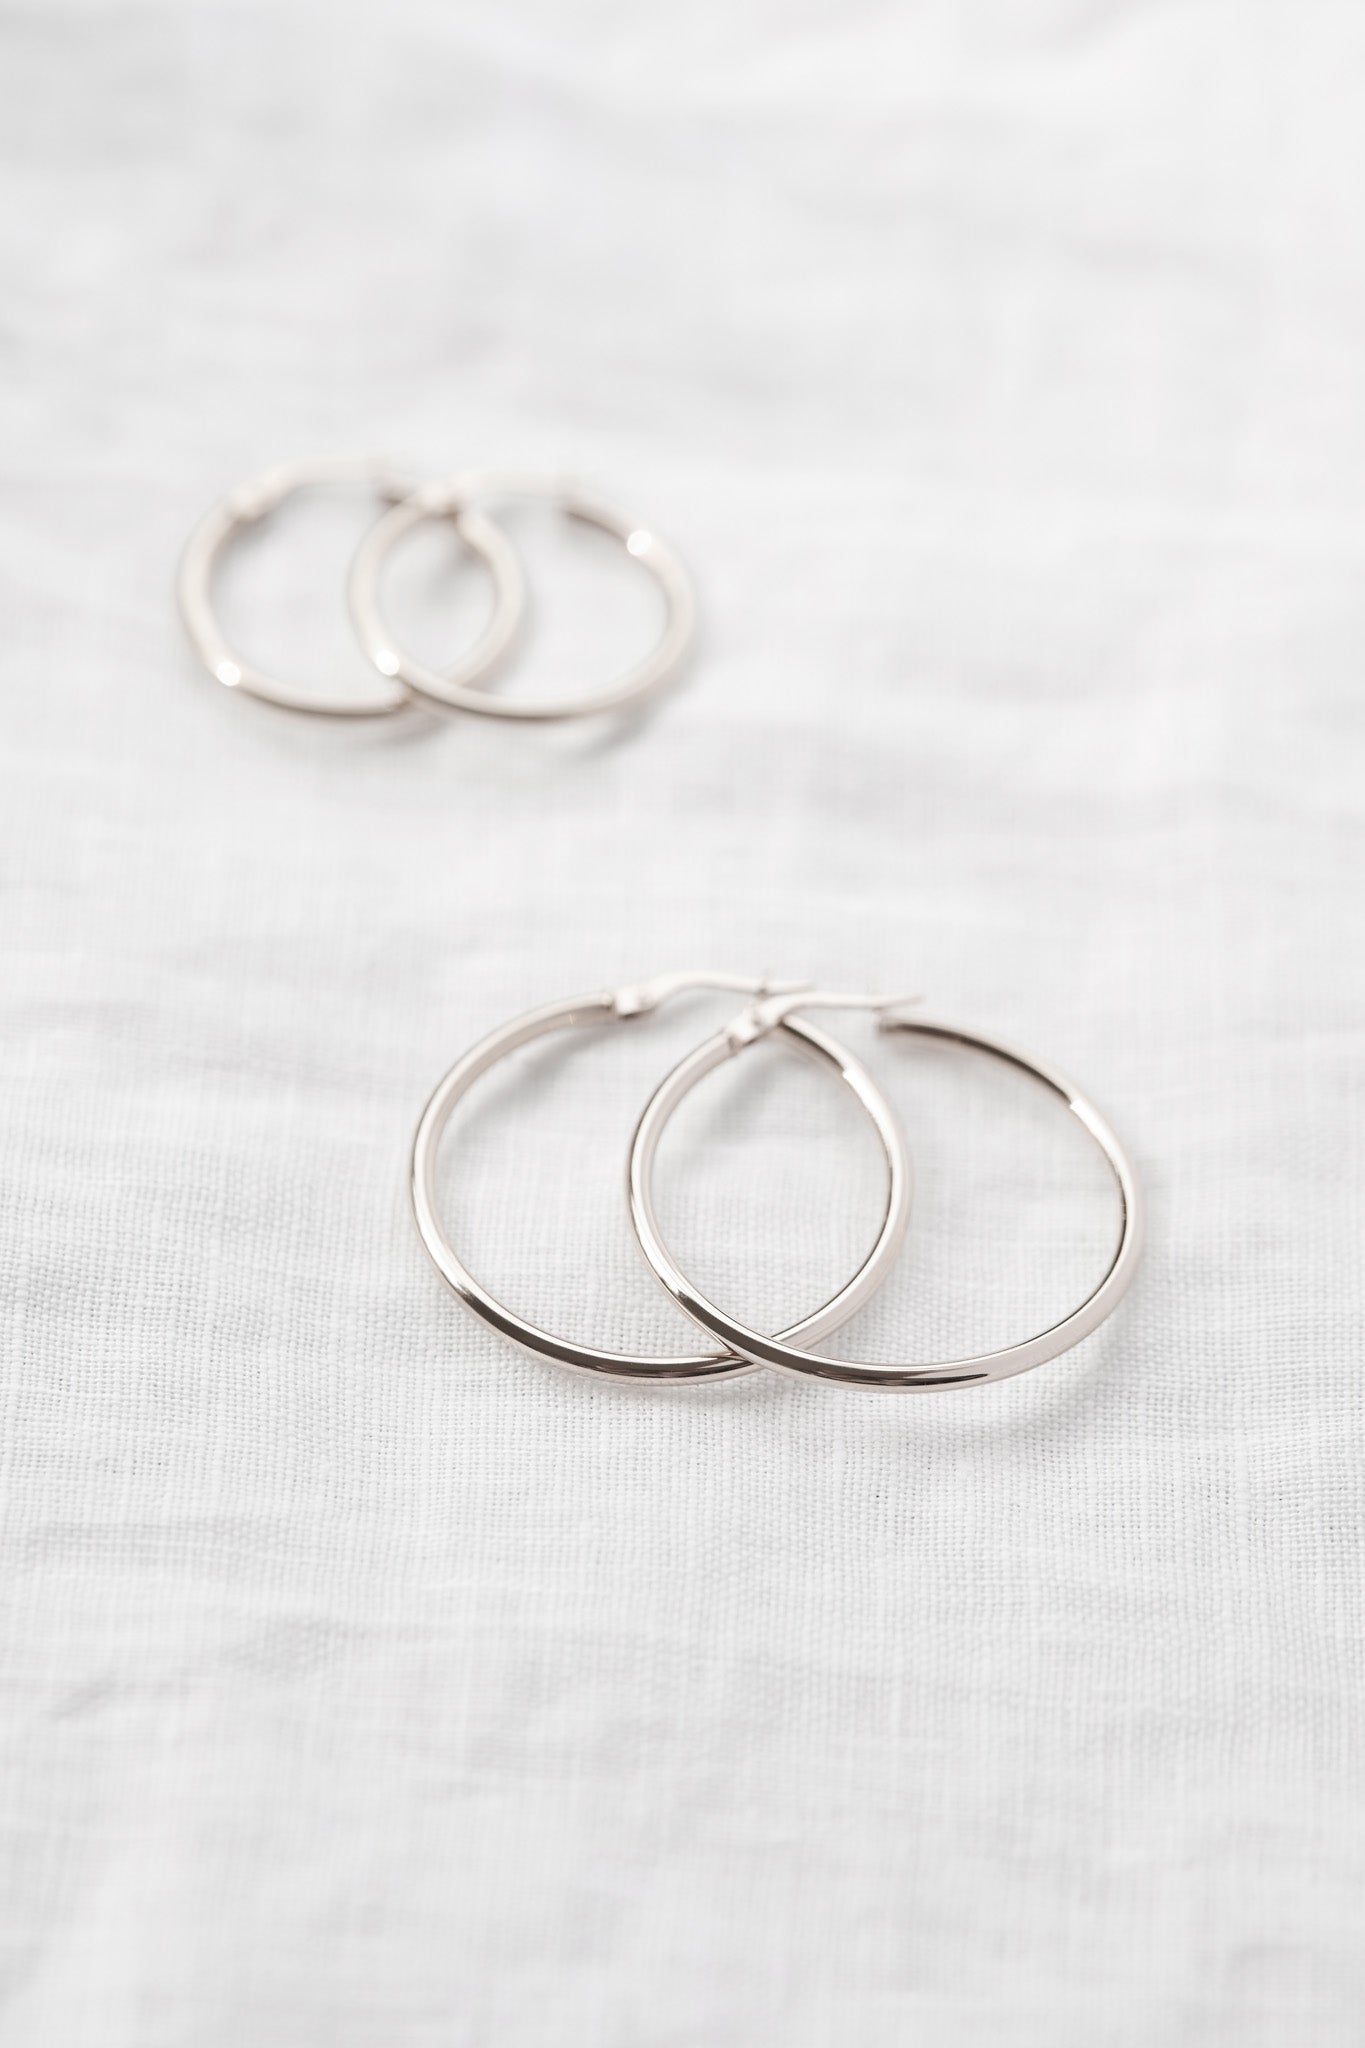 9ct Gold 30mm Hoops in White Gold